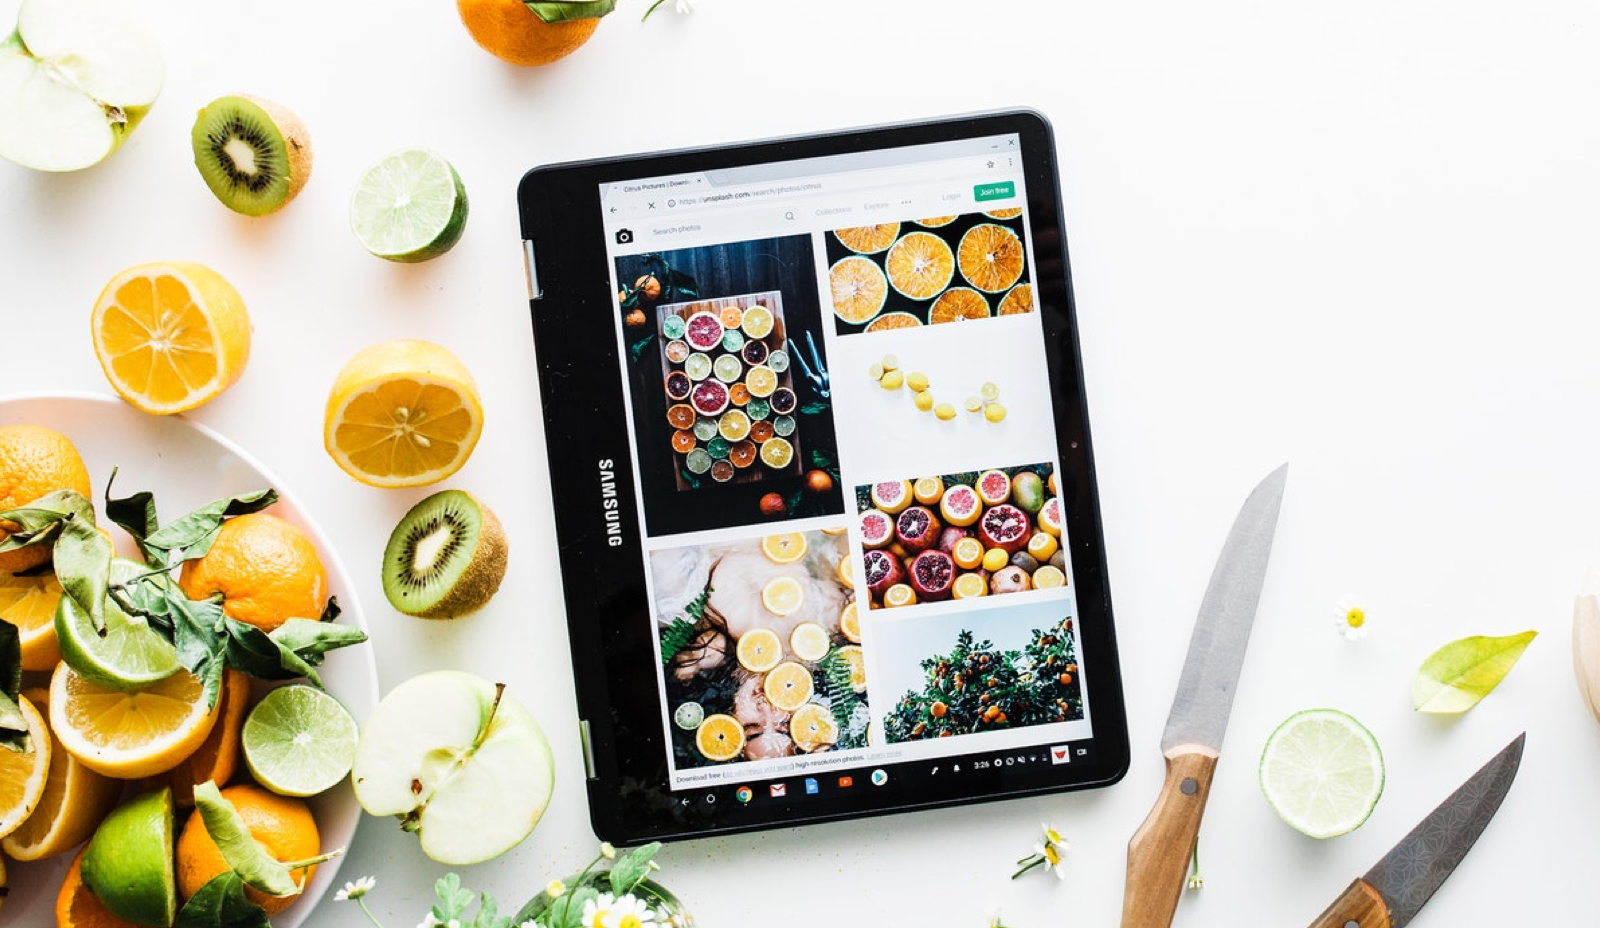 photo background: white surface filled with oranges and kiwis. photo foreground: ipad filled with different photos of oranges and grapefruits